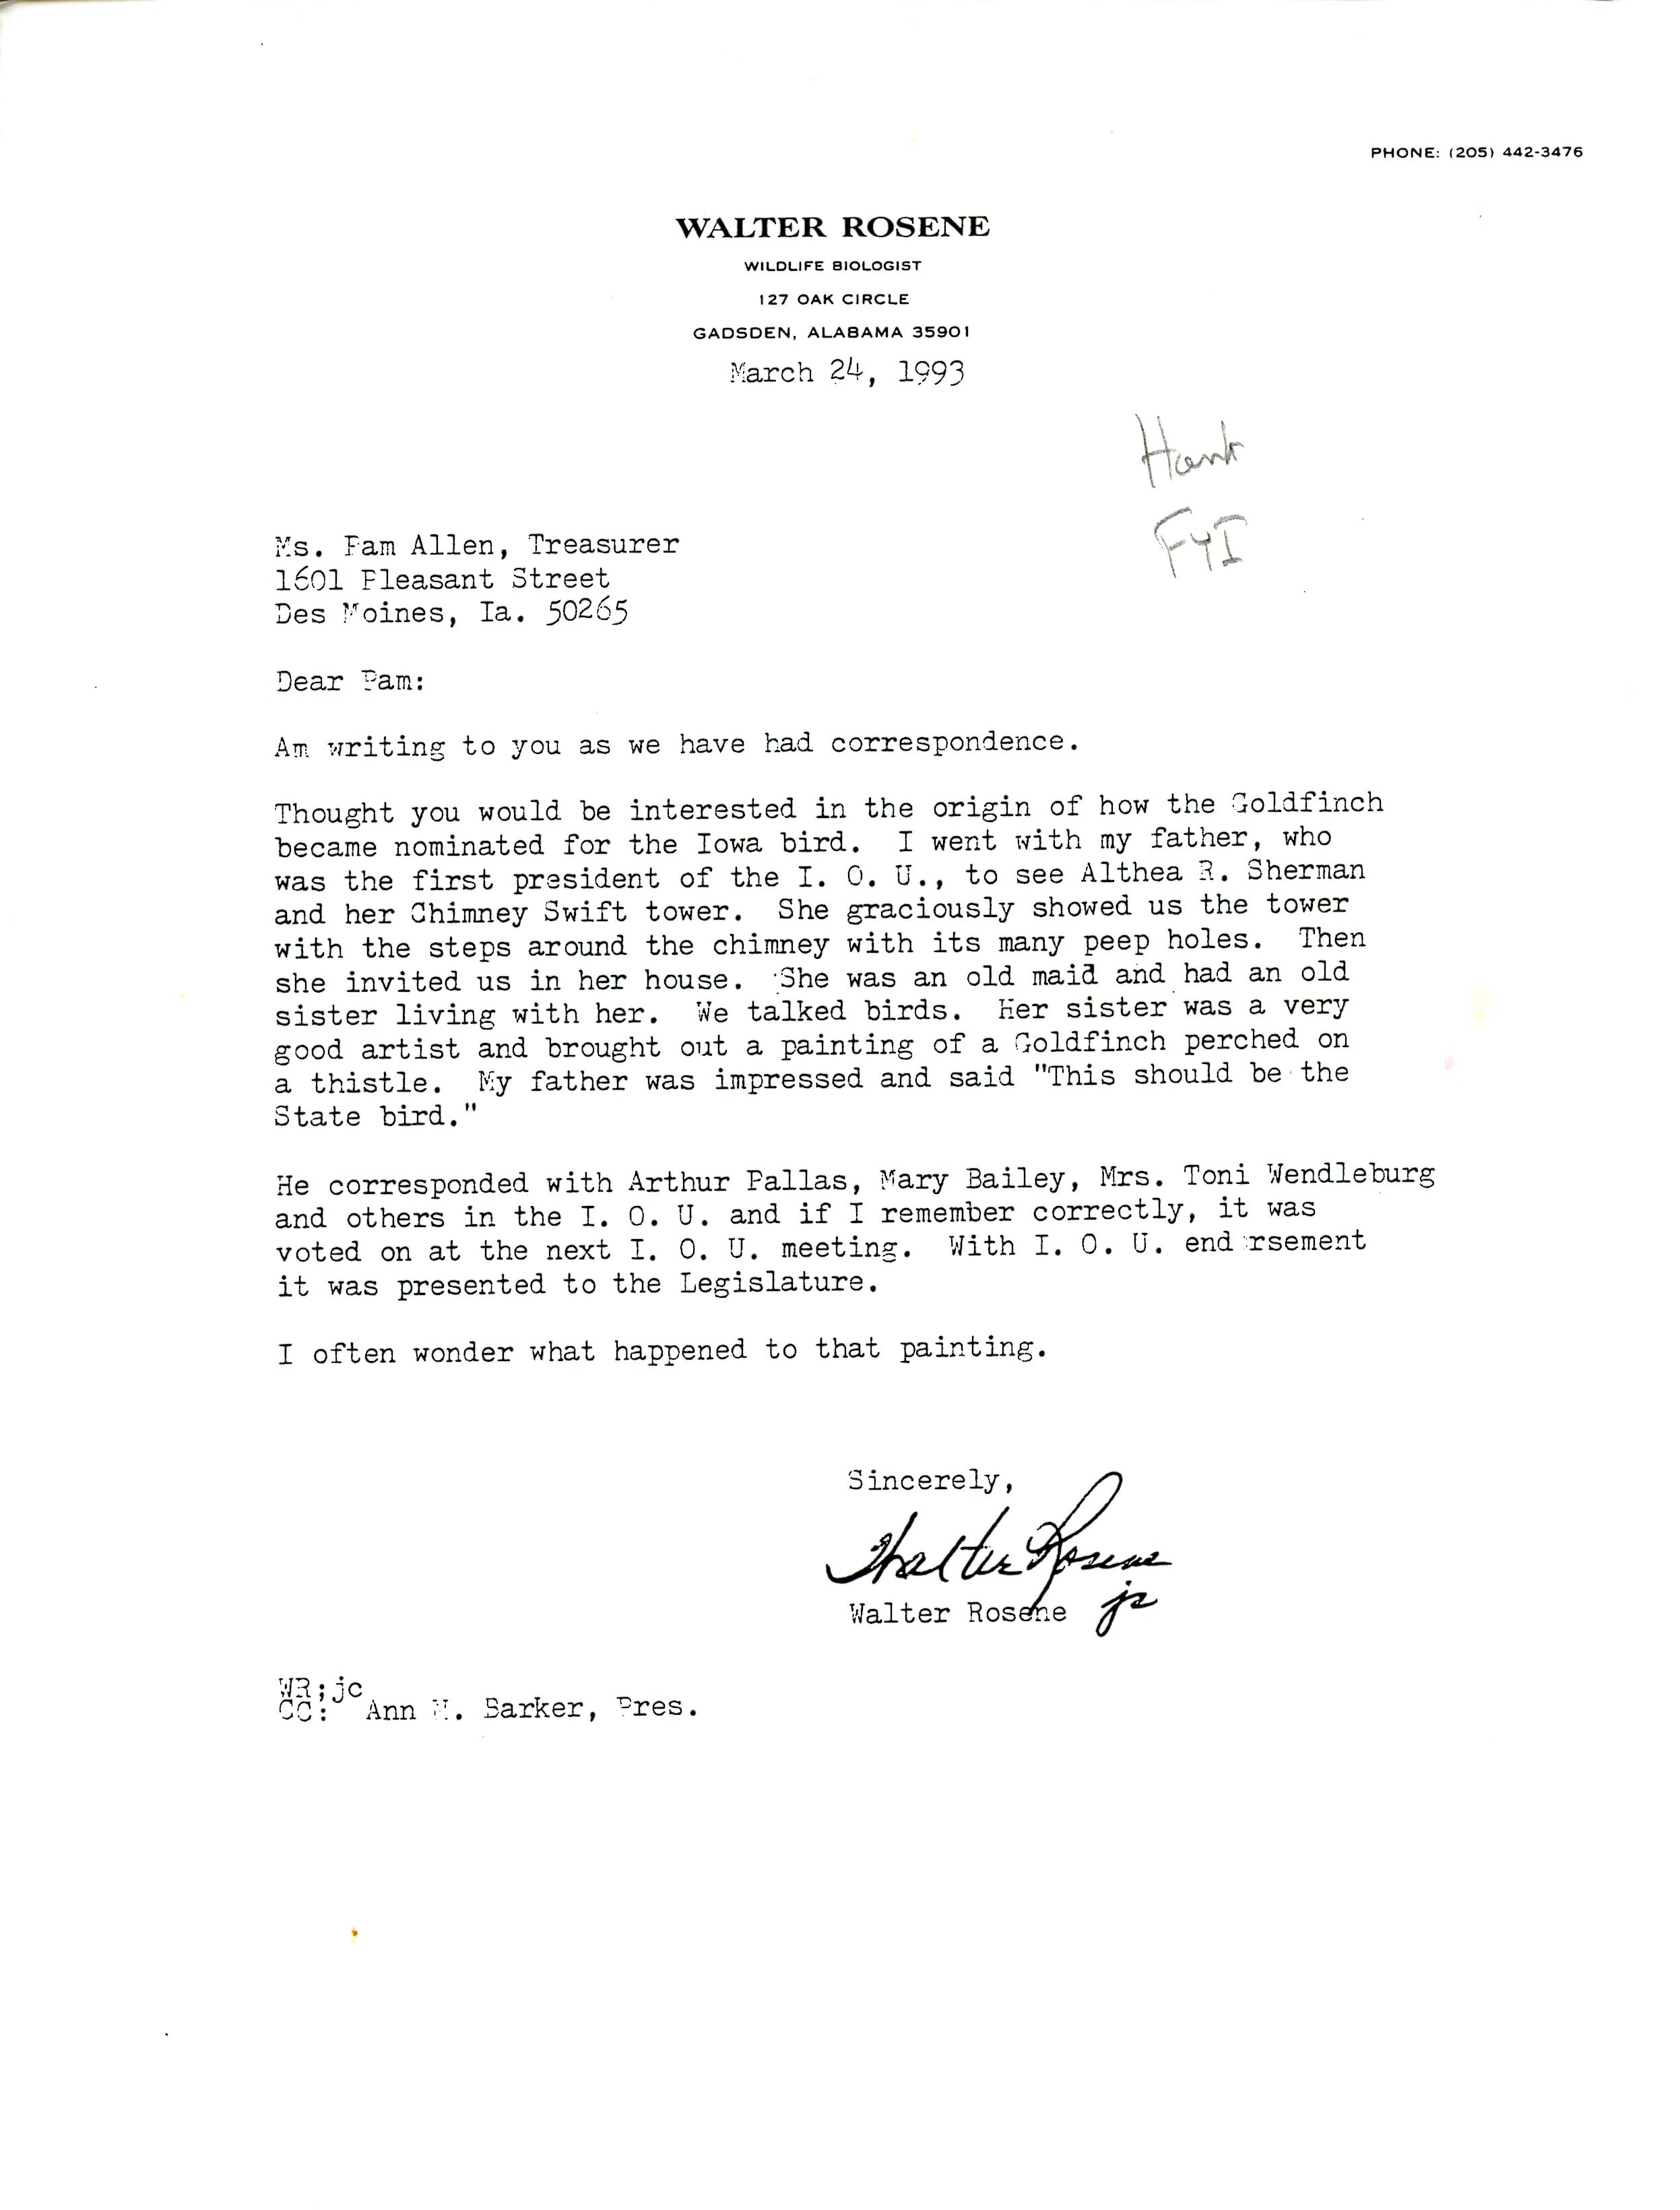 Walter Rosene, Jr. letter to Pam Allen regarding the nomination of the Goldfinch as the Iowa State bird, March 24, 1993